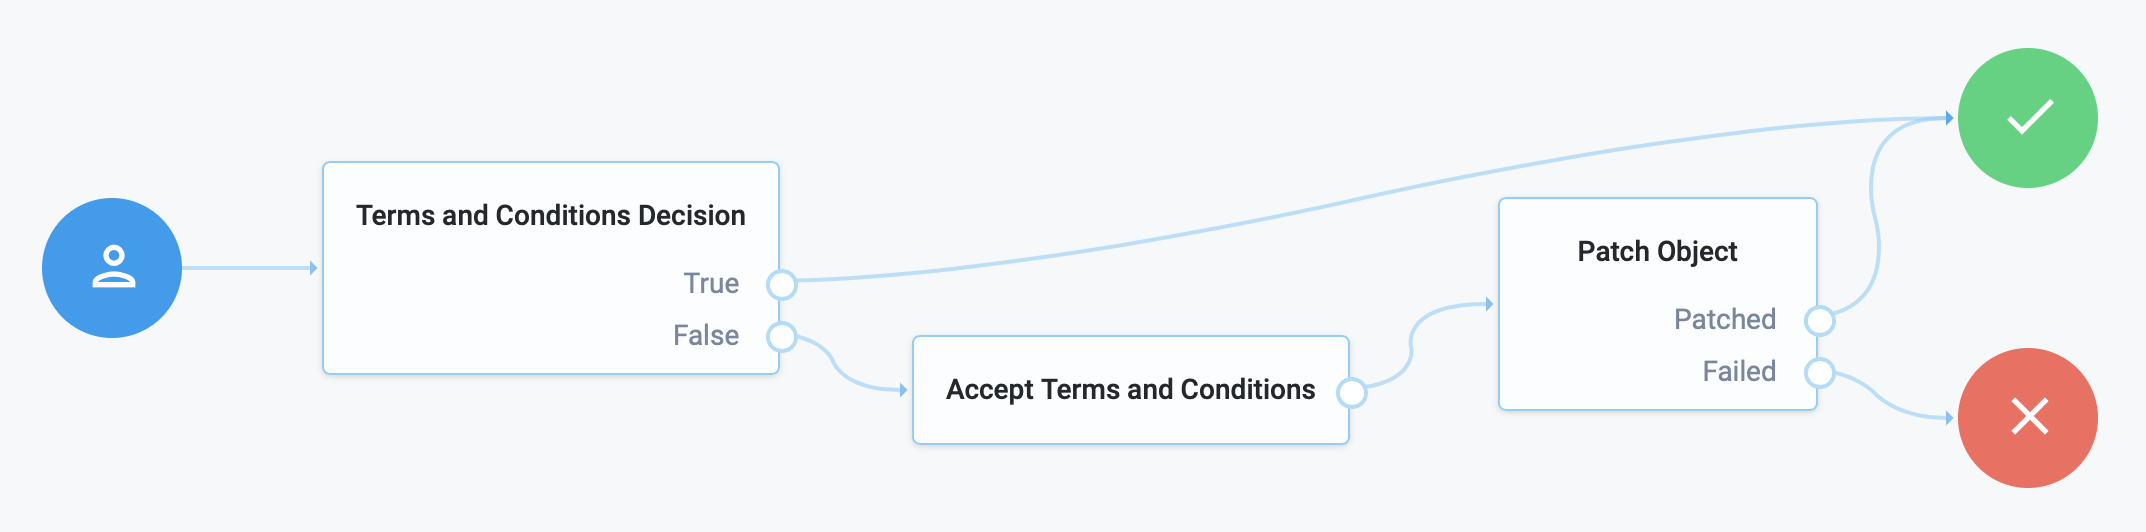 The Accept Terms and Conditions node in context